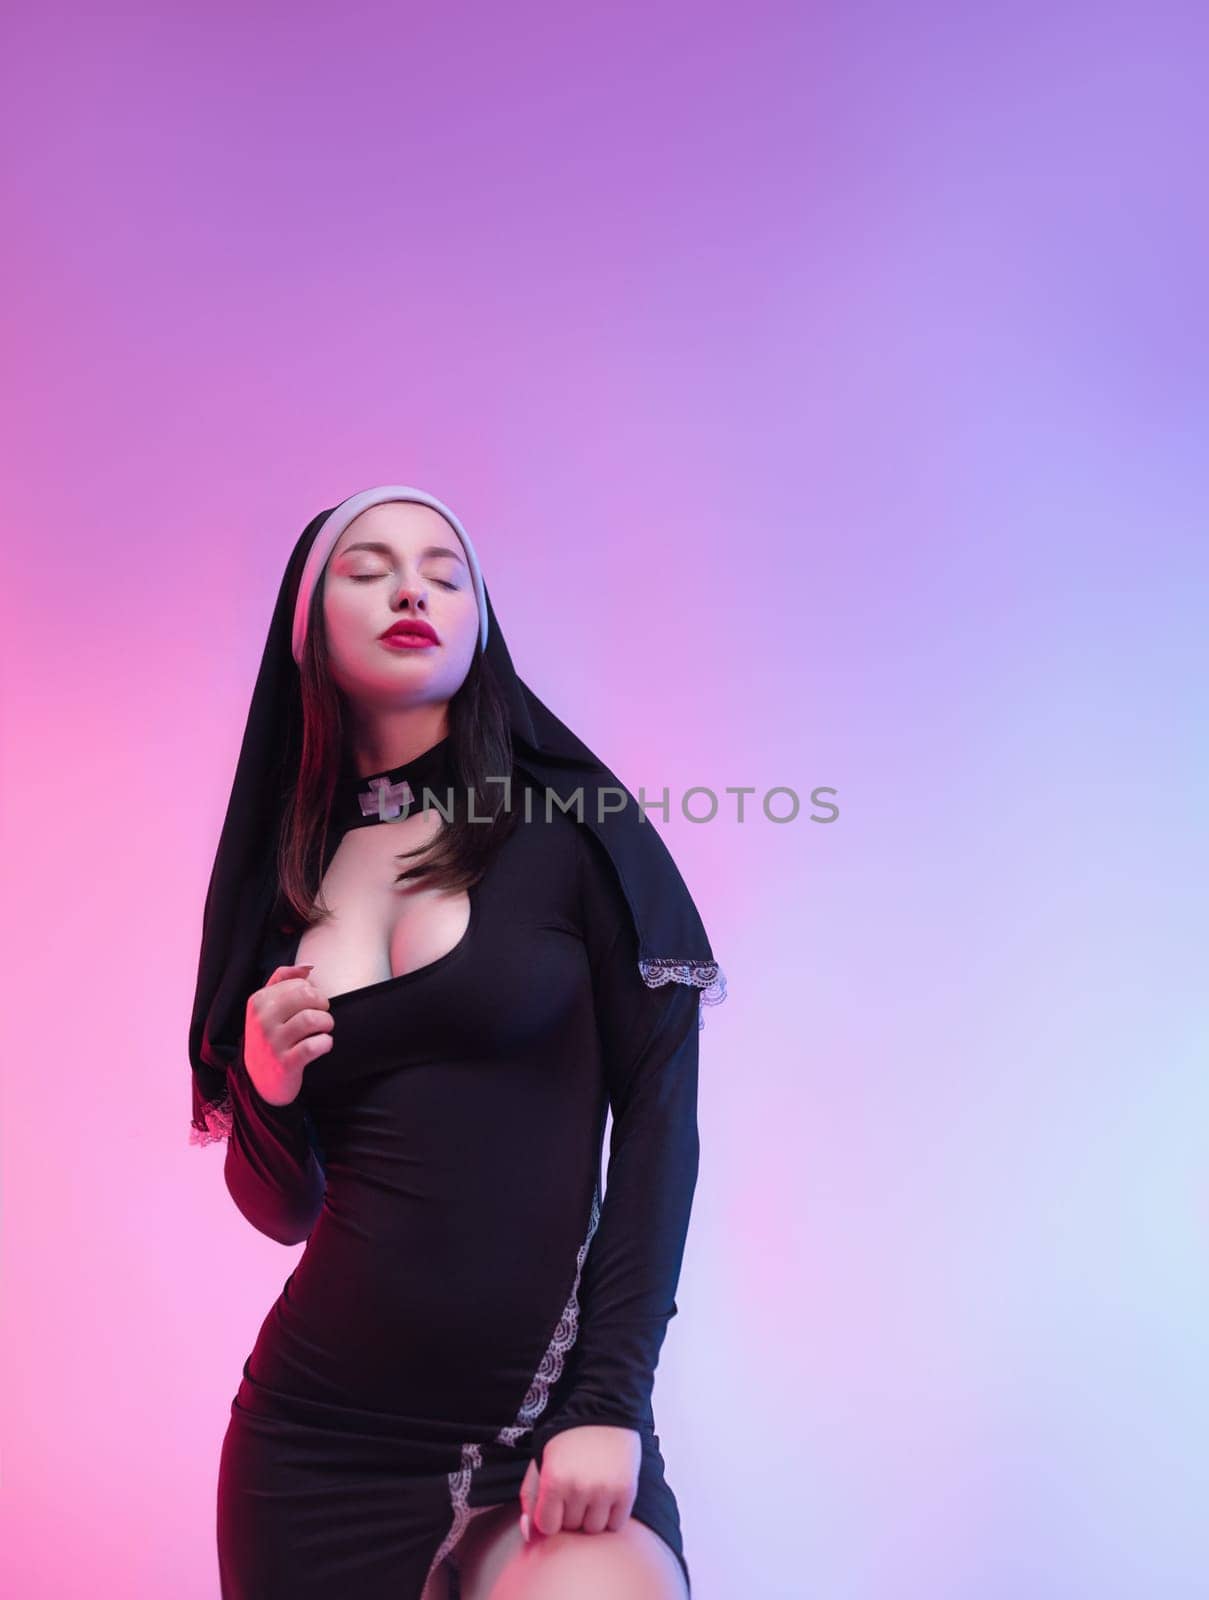 nun girl in a sexy dress defiantly poses naked on a neon background of a copy paste